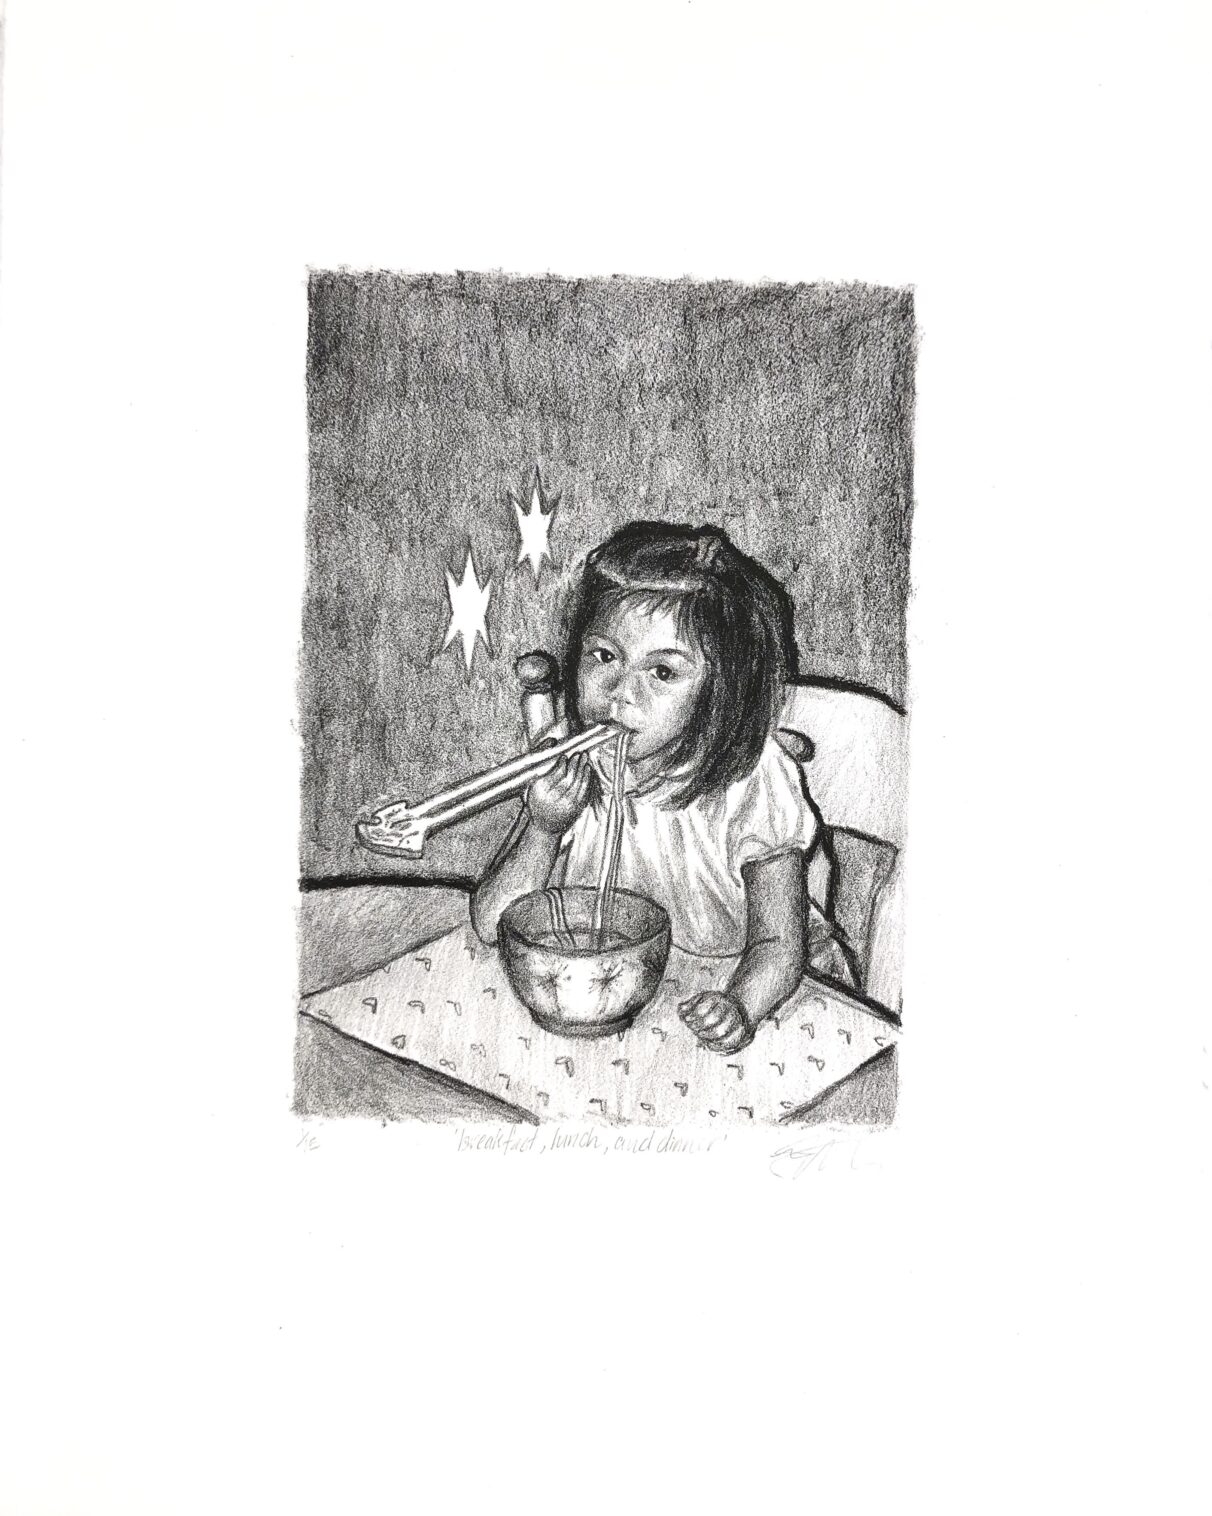 A print of a young girl eating noodles from a bowl with chopsticks.